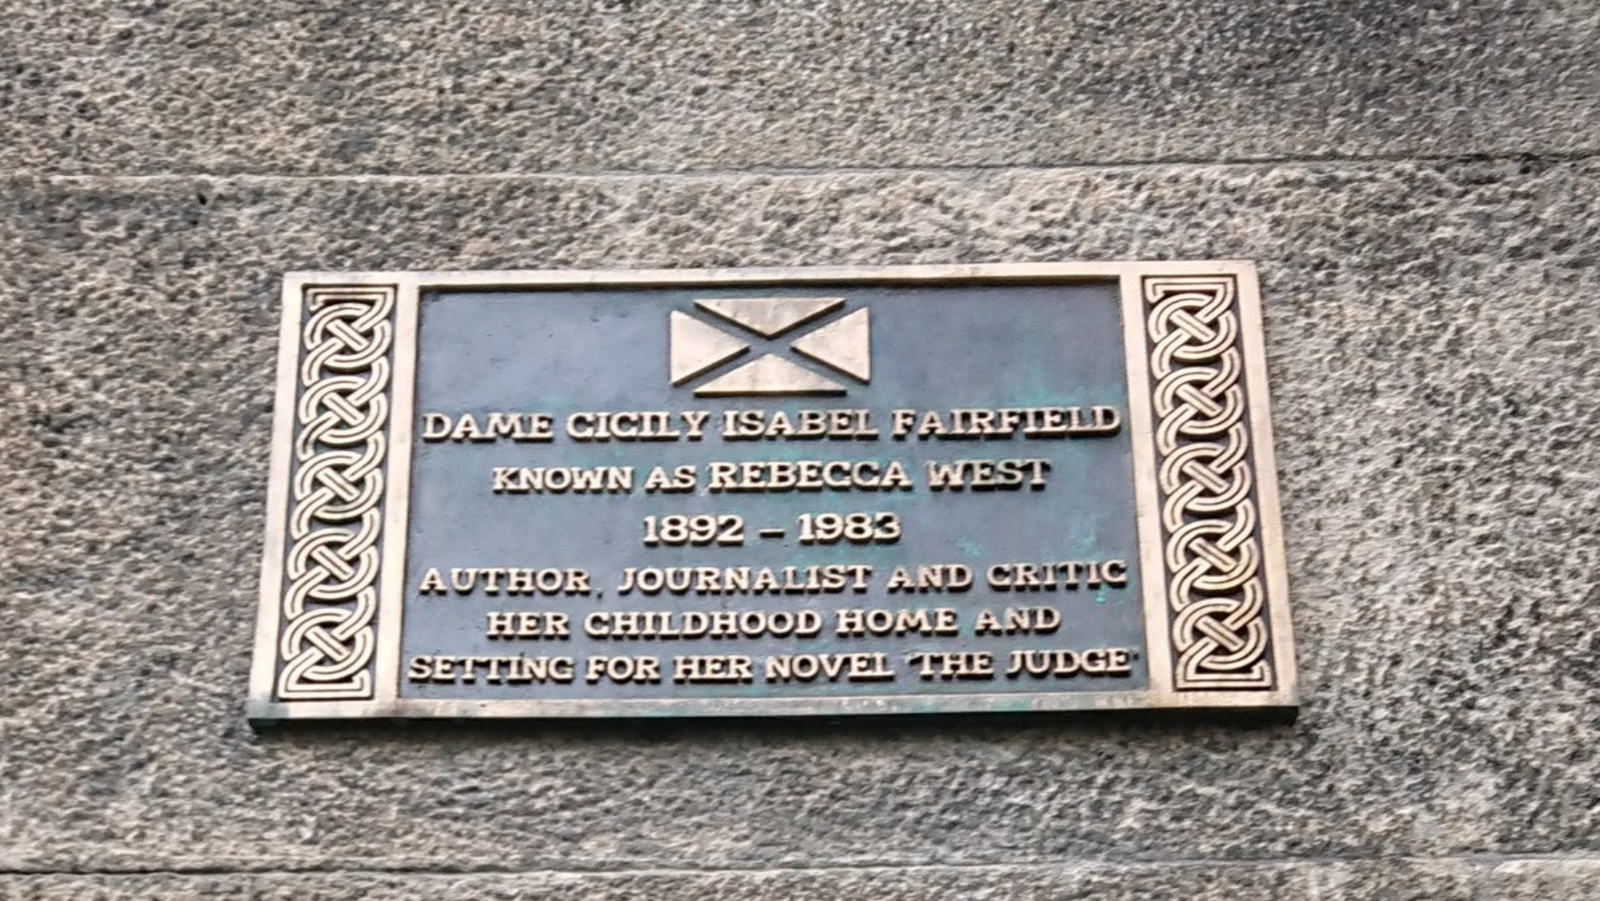 The plaque dedicated to Rebecca West from Historic Environment Scotland.